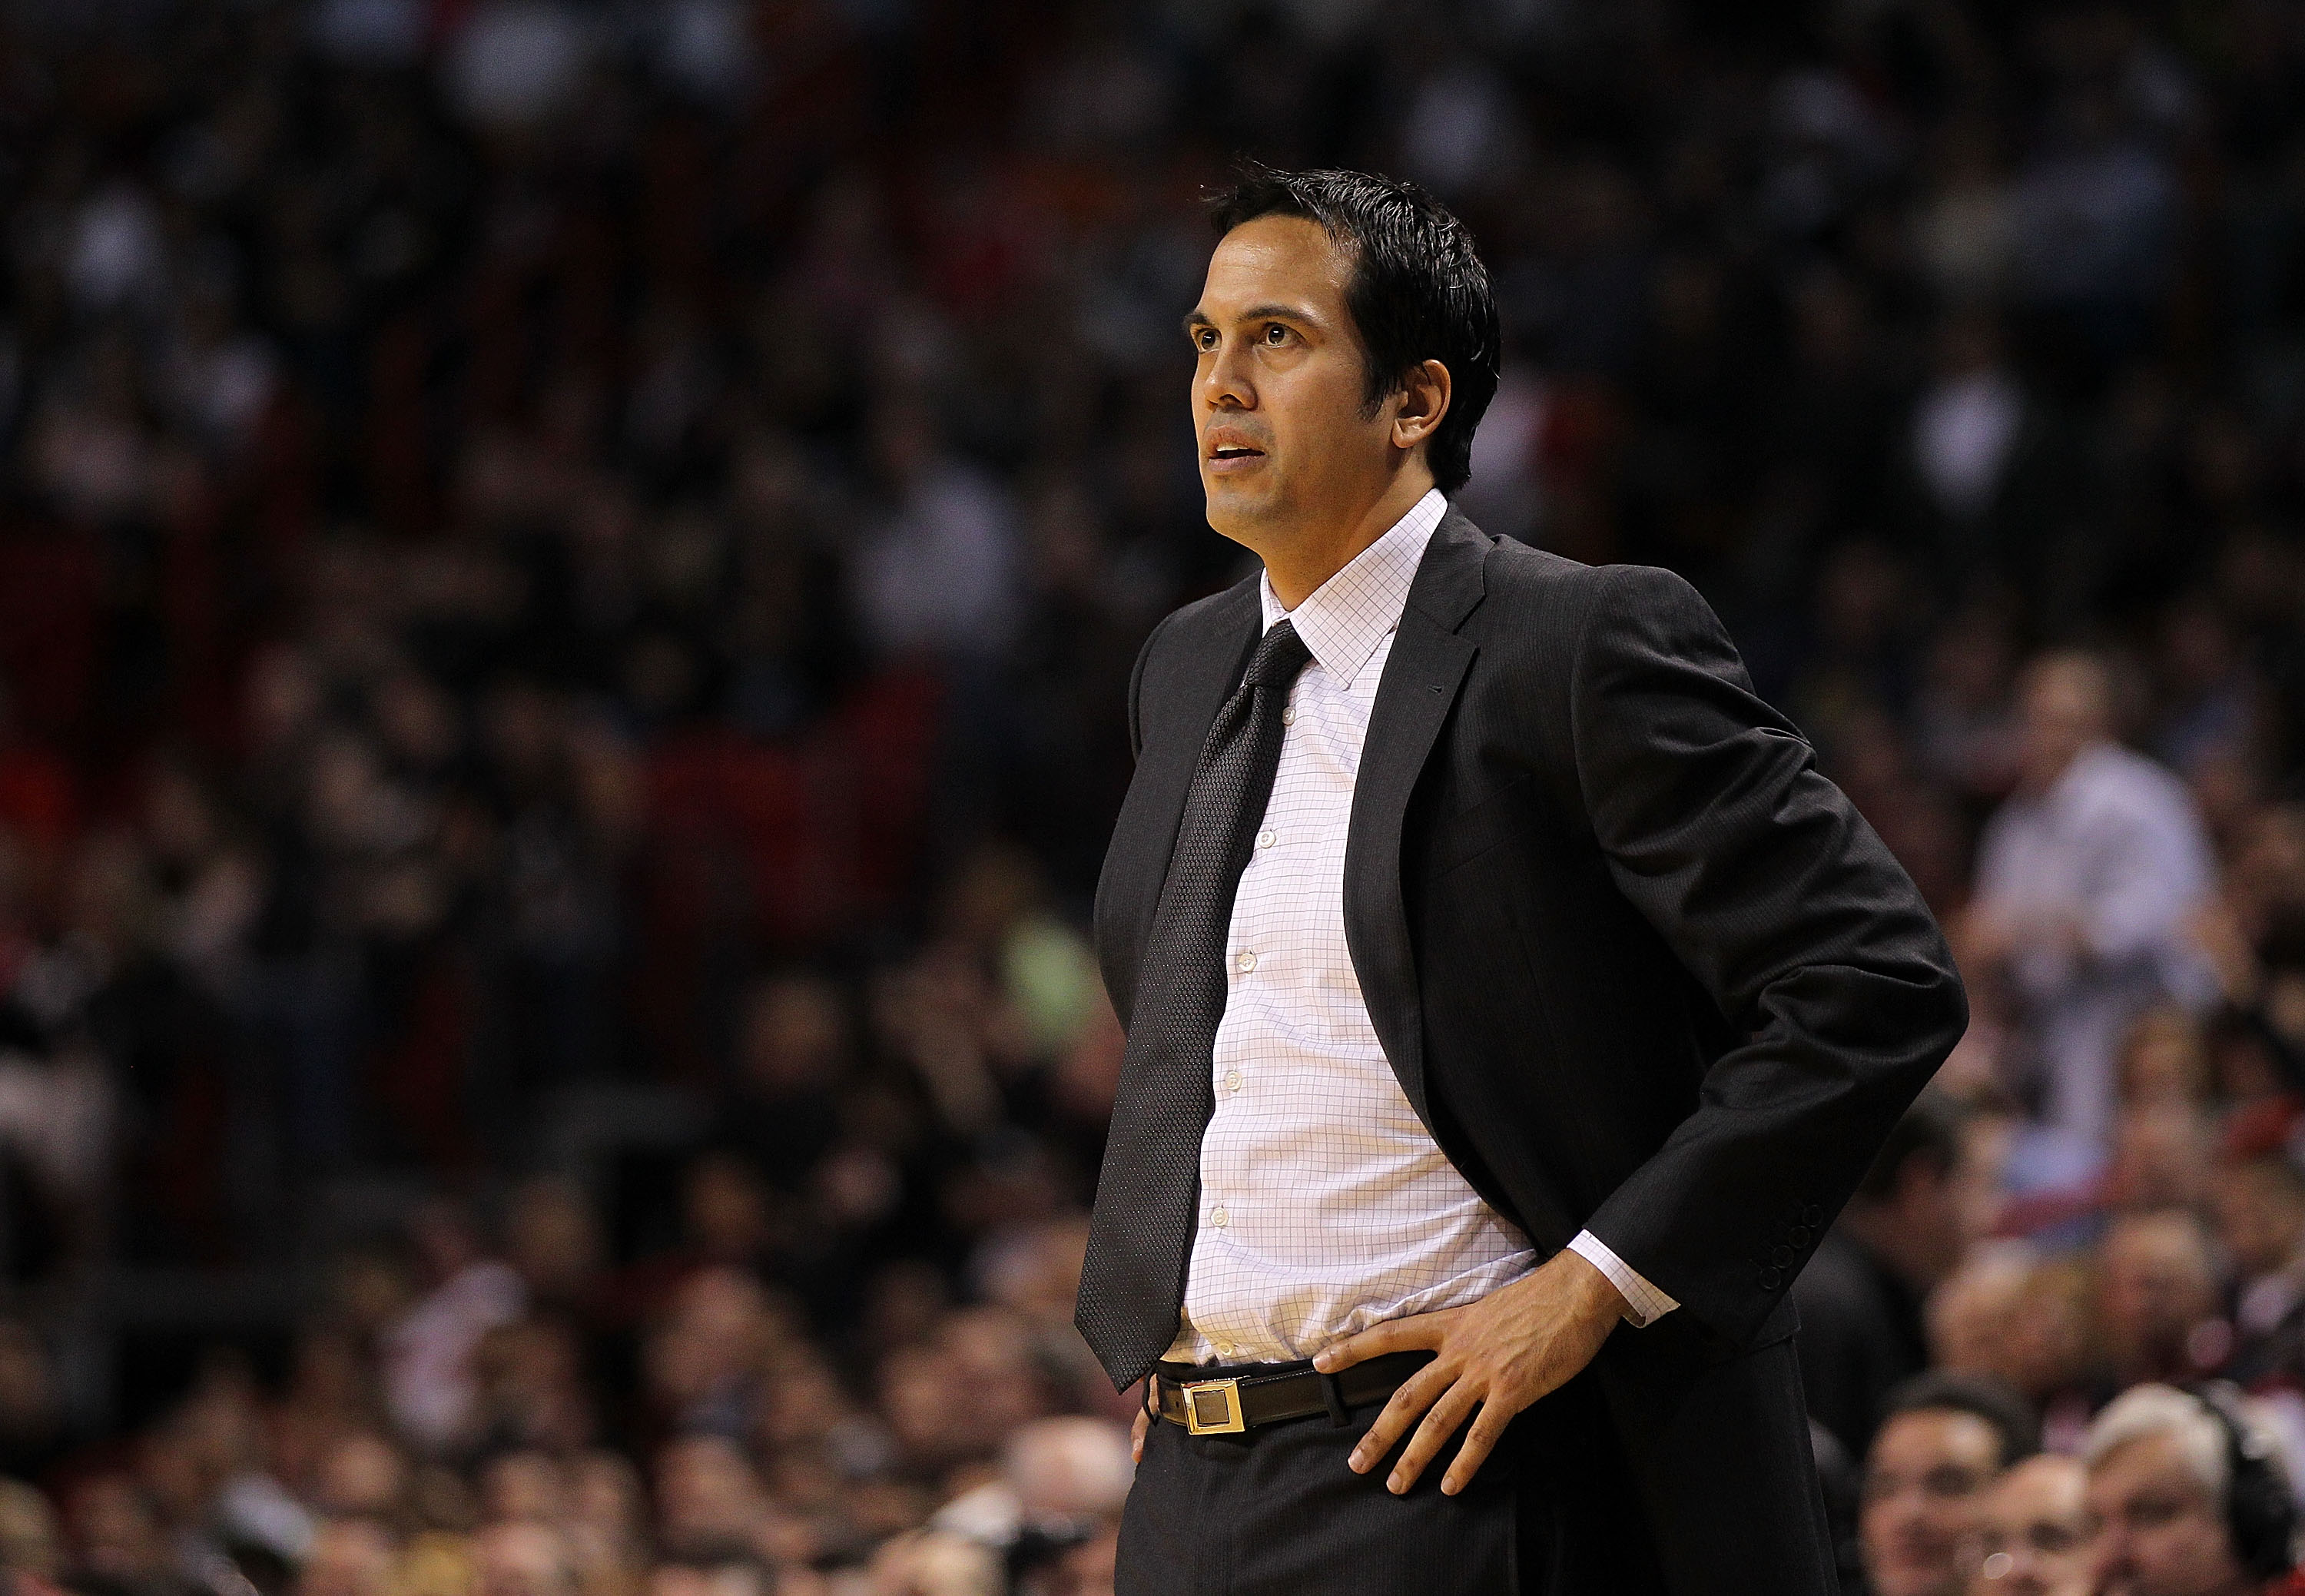 MIAMI, FL - JANUARY 22: Miami Heat head coach Erik Spoelstra looks on during a game against the Toronto Raptors at American Airlines Arena on January 22, 2011 in Miami, Florida. NOTE TO USER: User expressly acknowledges and agrees that, by downloading and